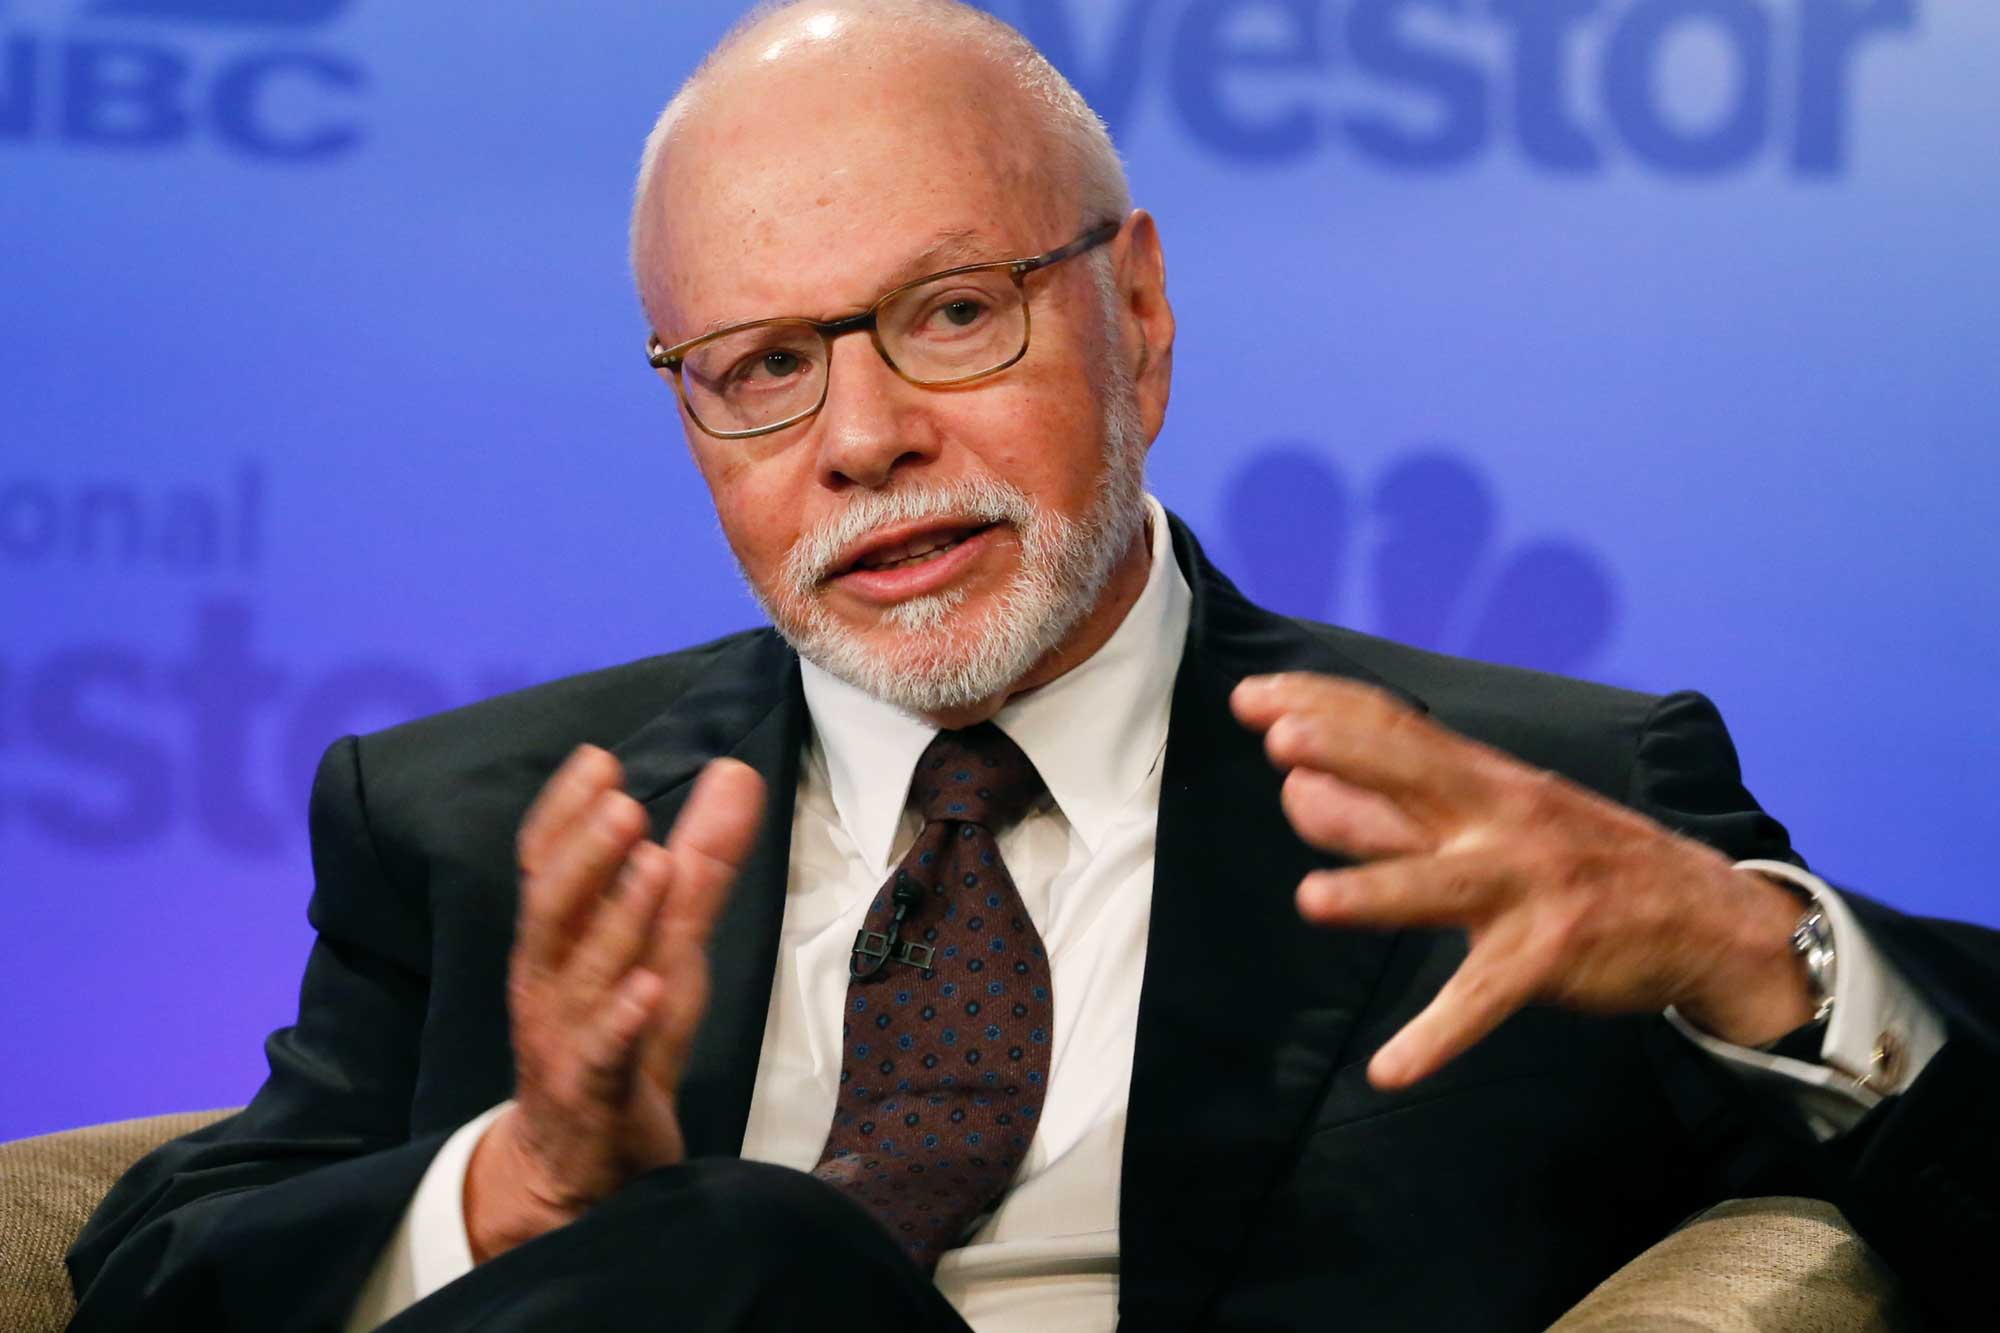 Elliott Management's Paul Singer seeks to replace Twitter CEO Jack Dorsey, source says - CNBC